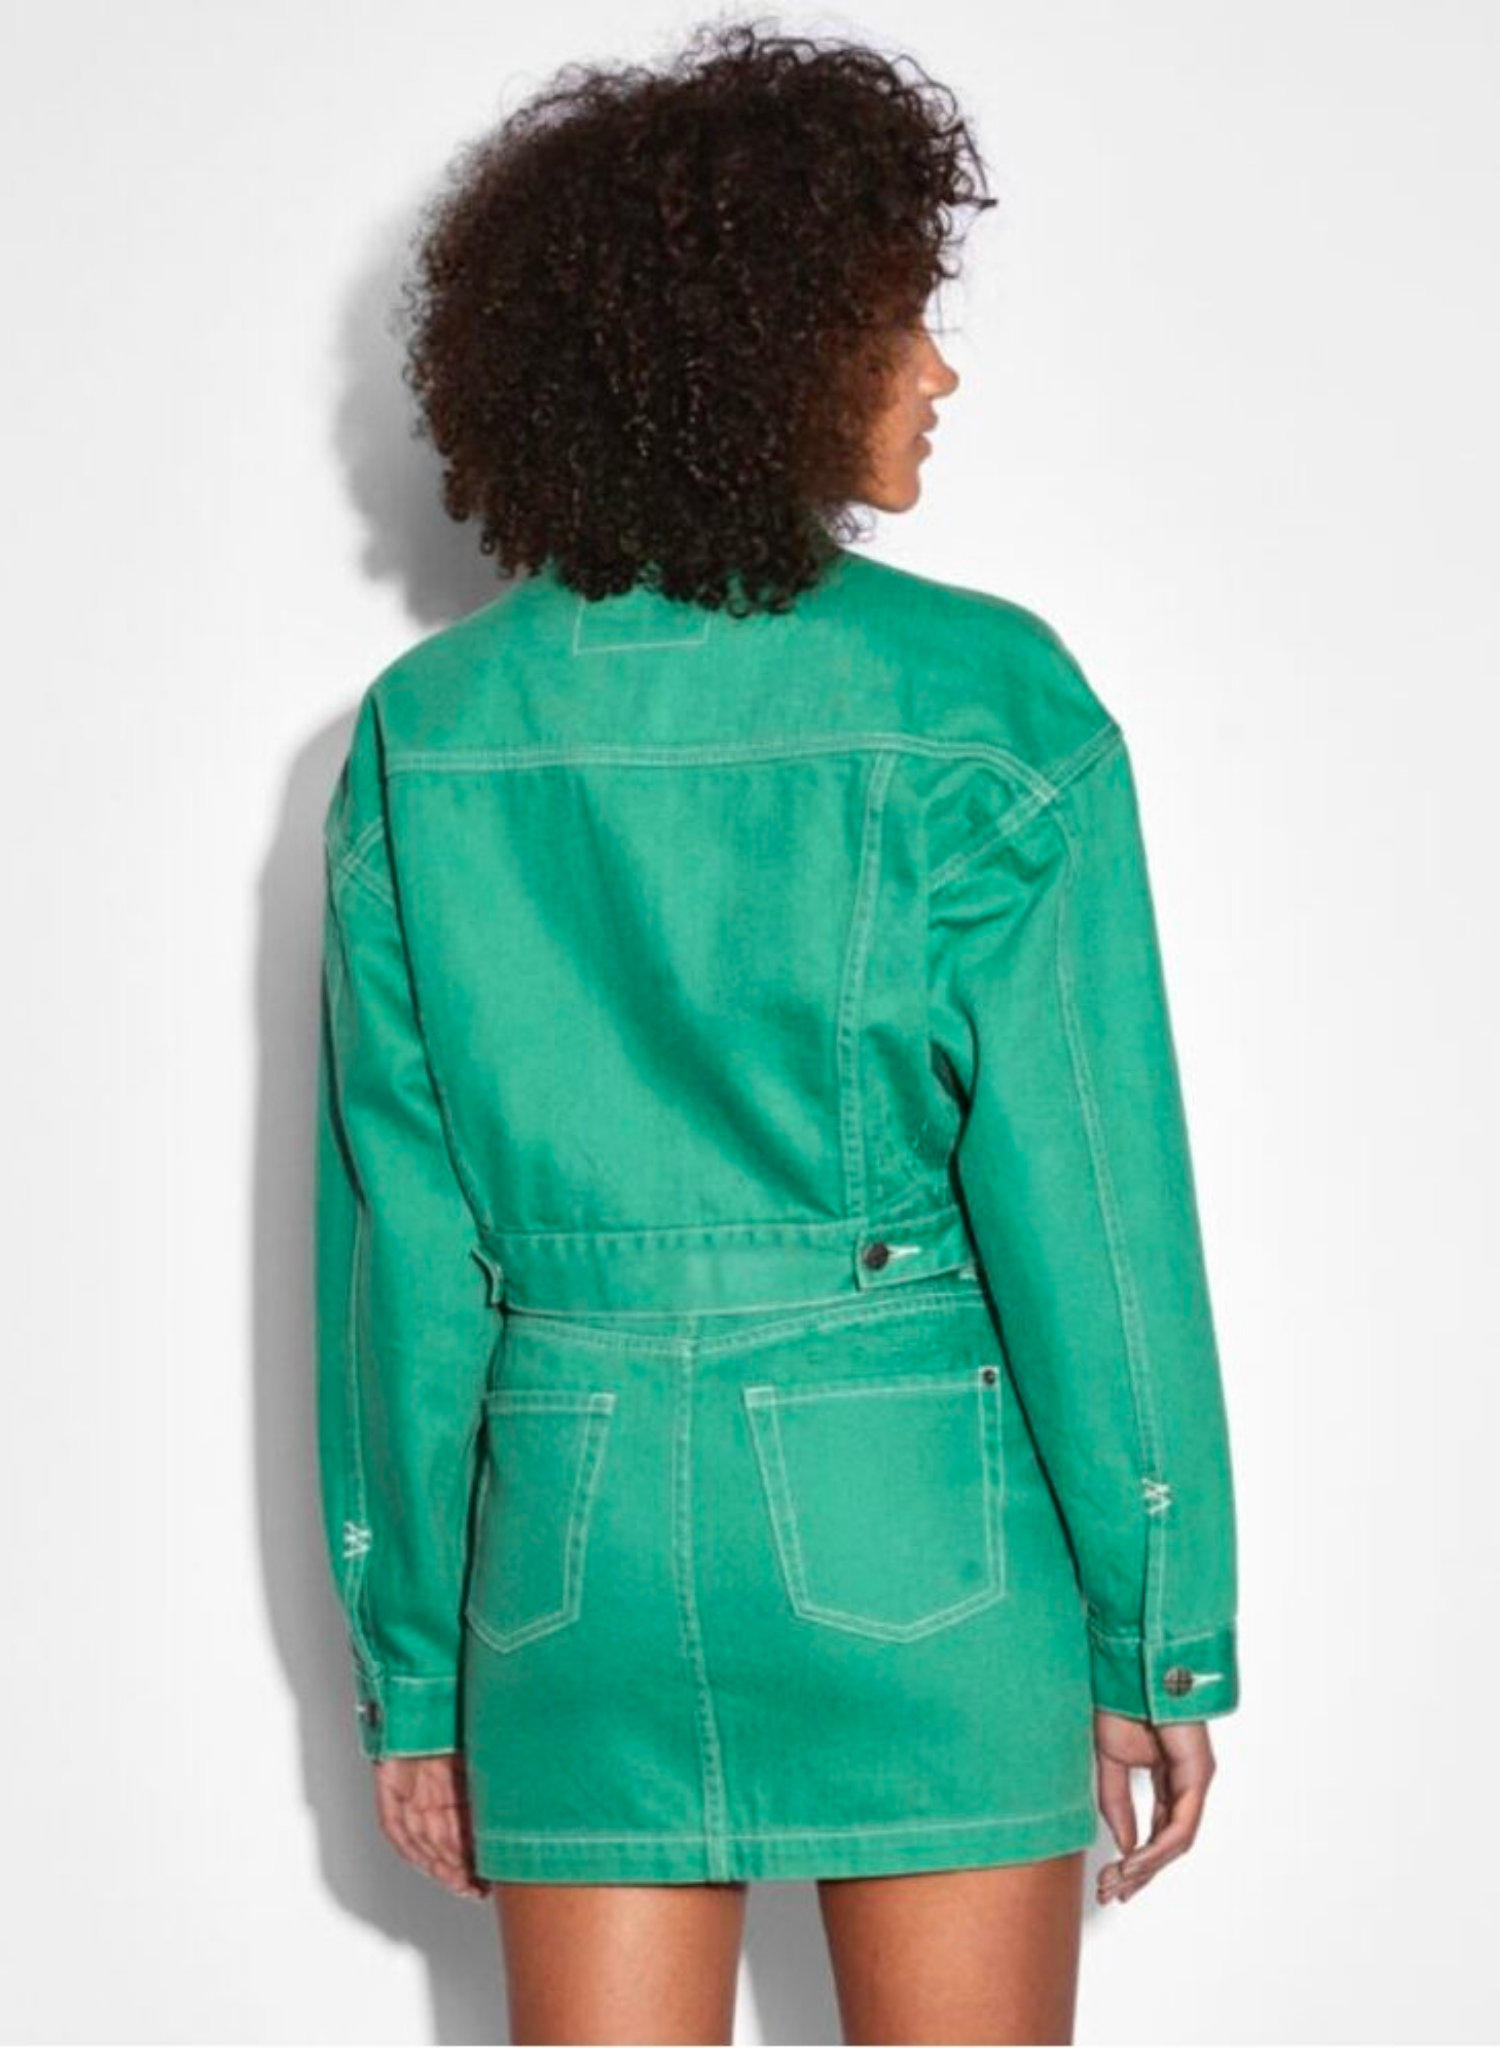 The Billie Jacket Jade is constructed from premium rigid denim in Ksubi’s custom jade colourway. This oversized, cropped trucker jacket features classic denim detailing, contrast white stitching and Ksubi branding. Wear with the ‘Super X Mini Jade’ for a colour coordinated look.